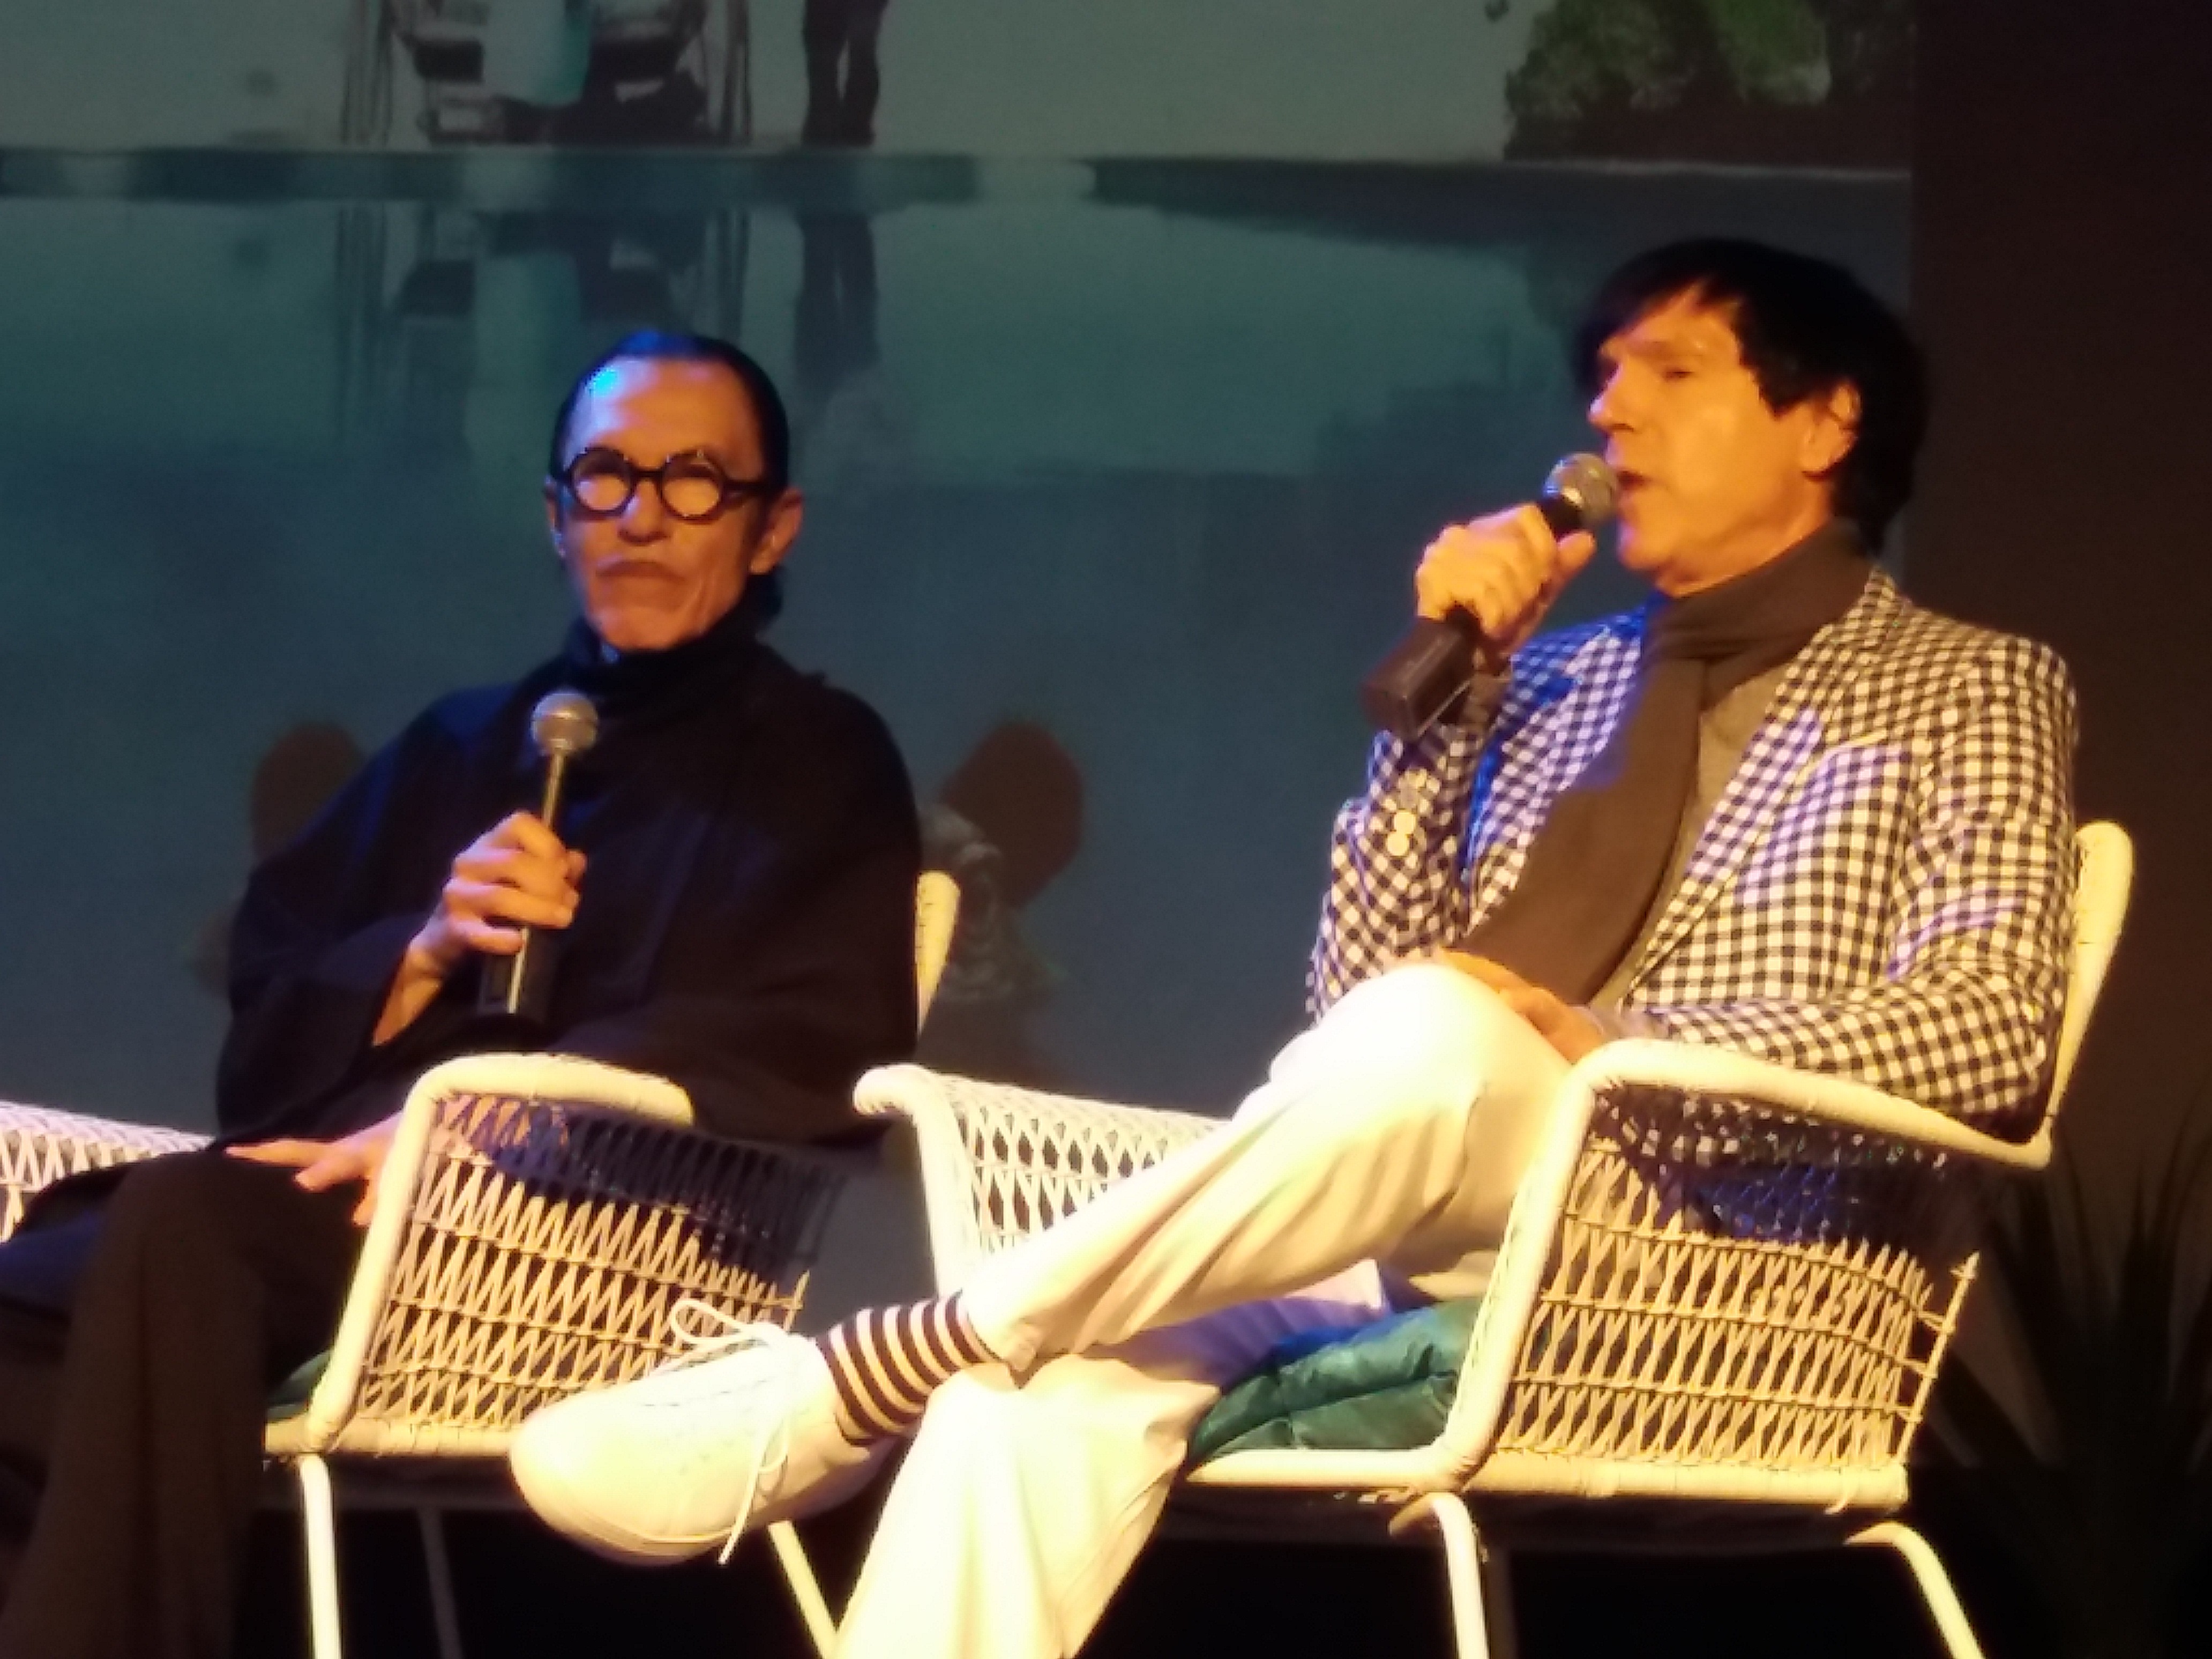 SPARKS Album Launch Party – ICA, The Mall London, 7 Sept 2017